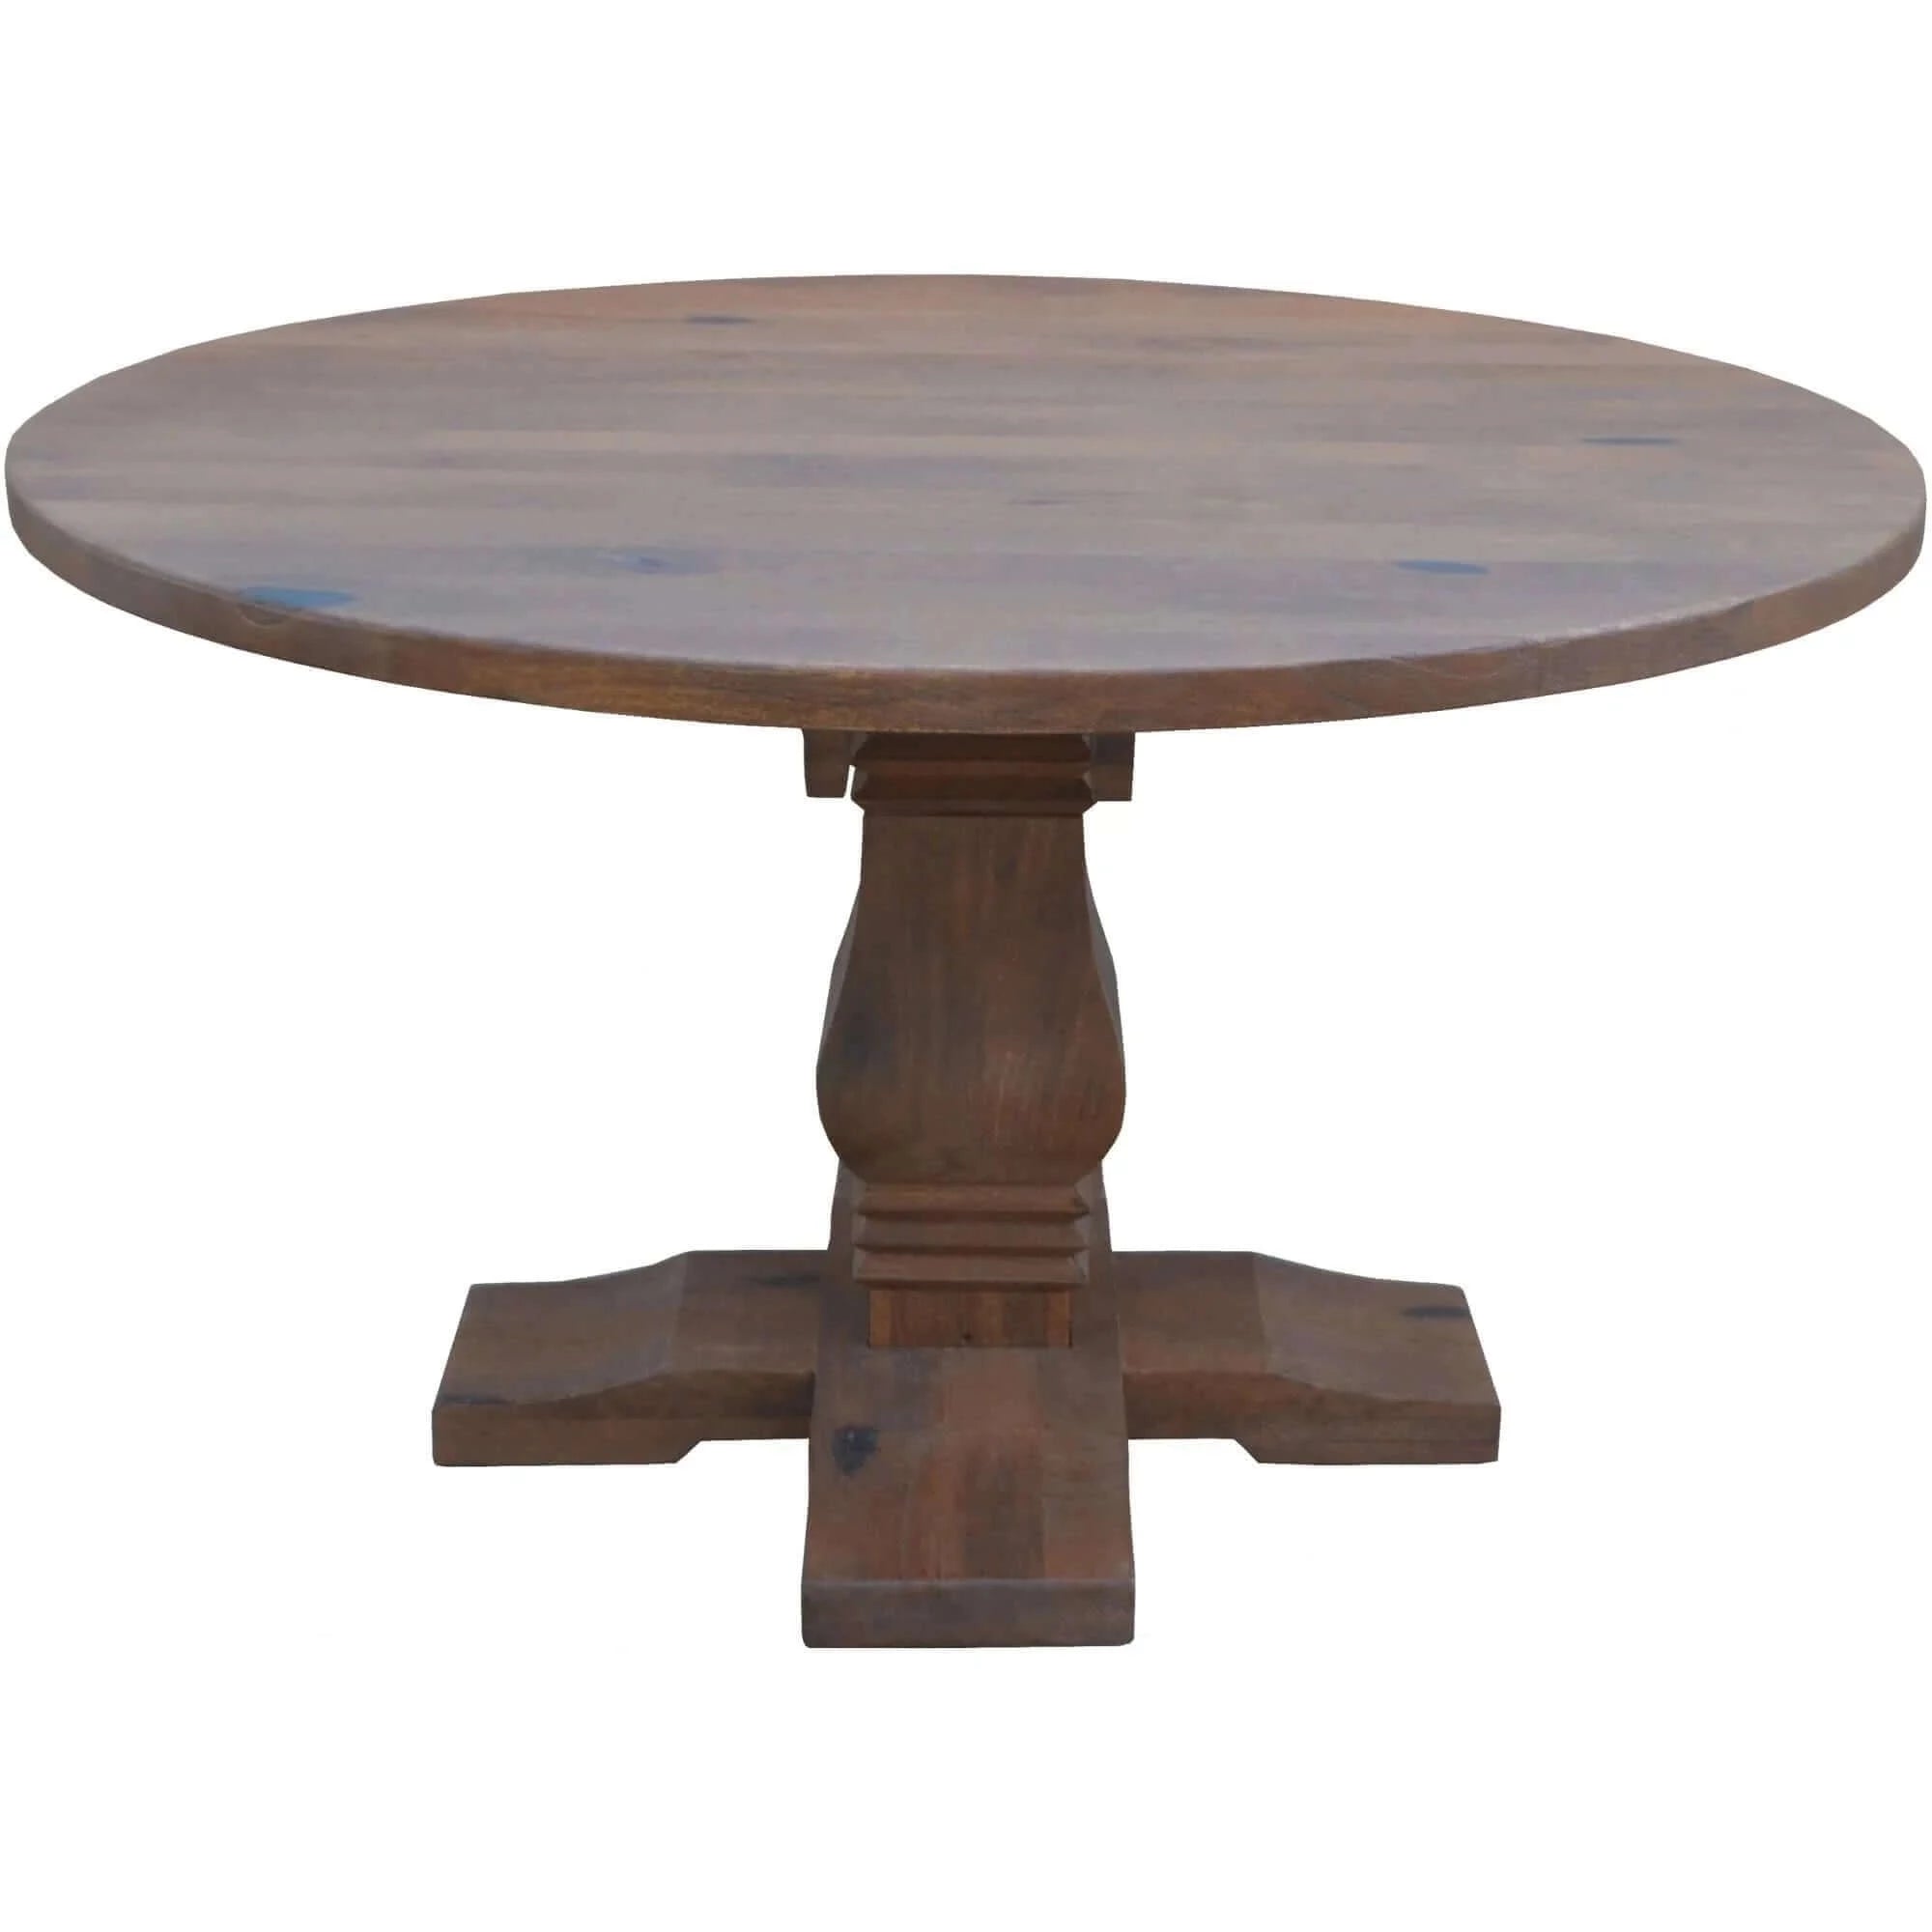 Buy florence round dining table 135cm french provincial pedestal solid timber wood - upinteriors-Upinteriors